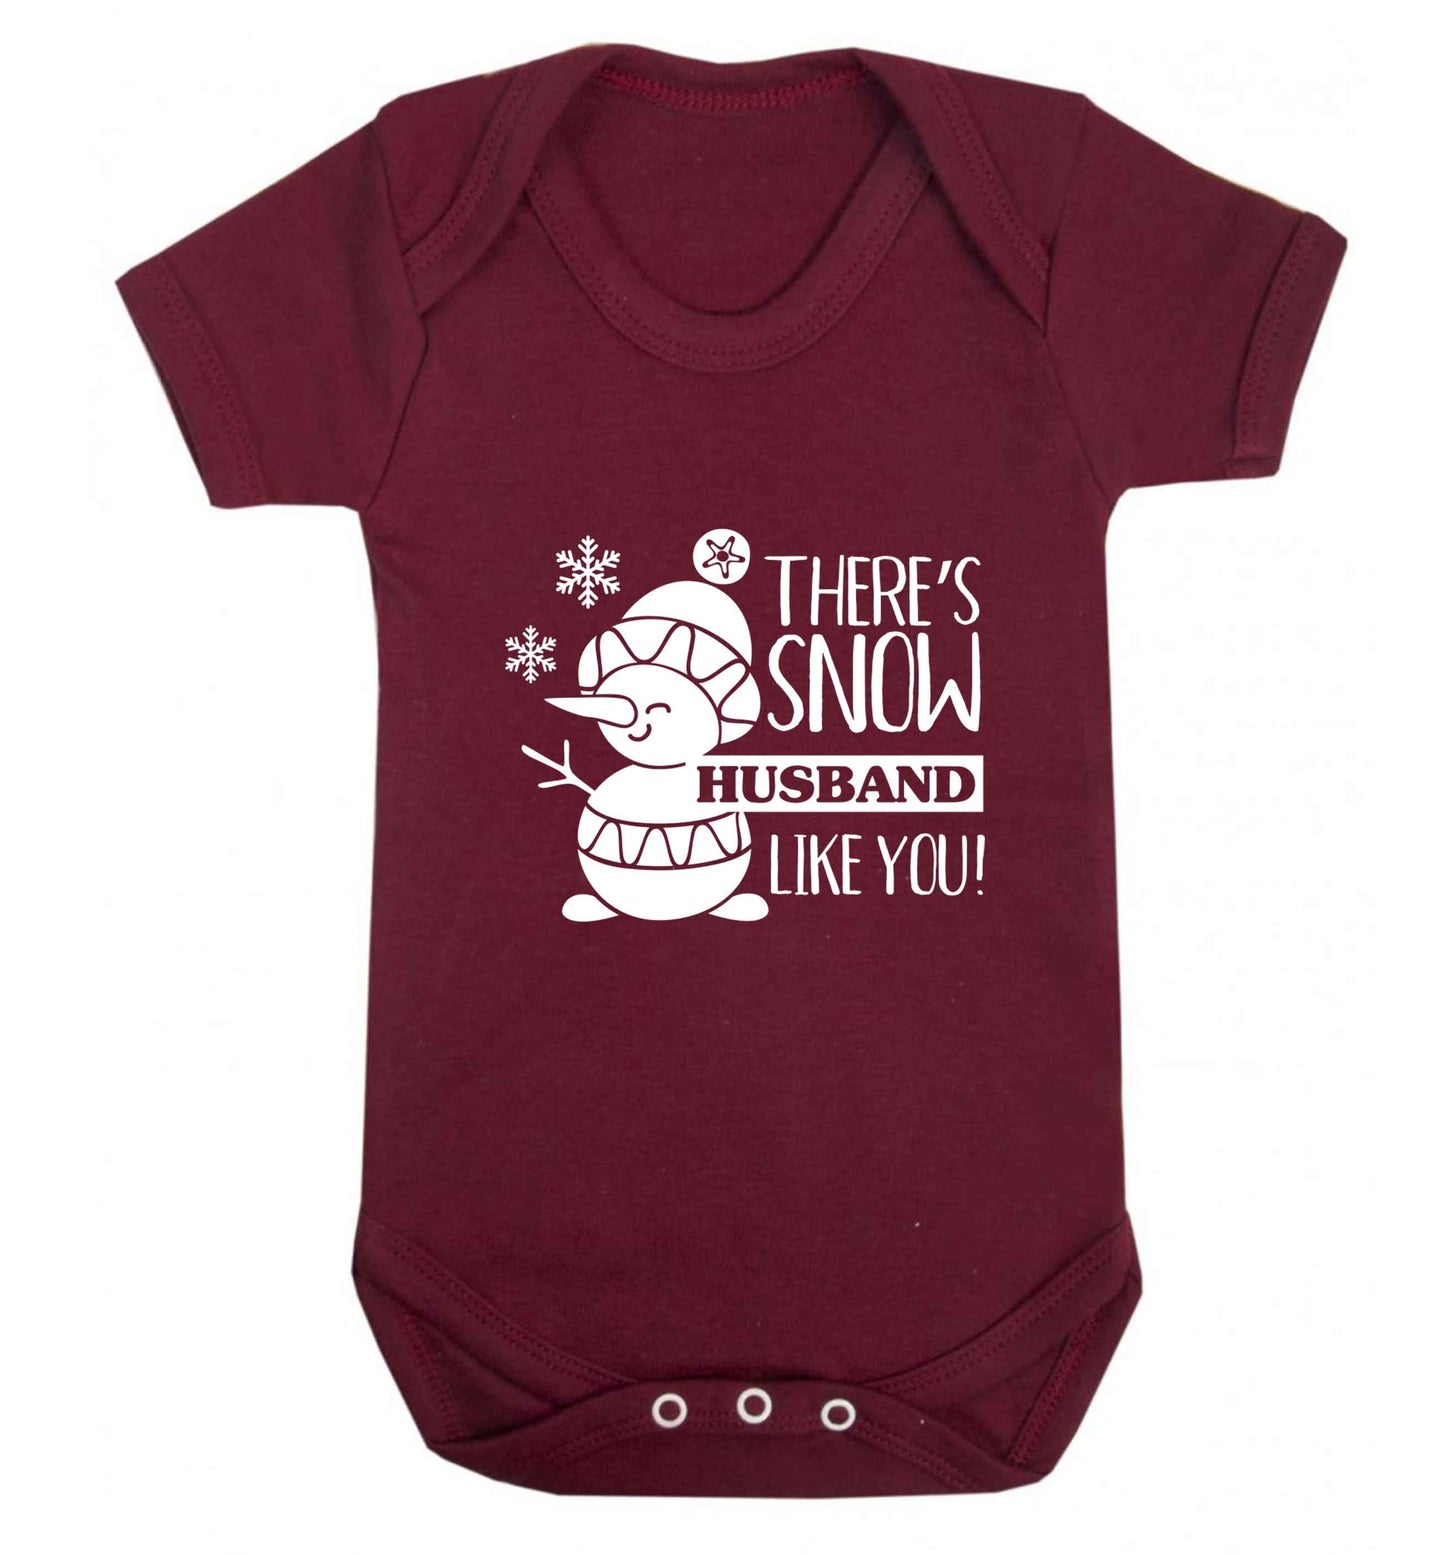 There's snow husband like you baby vest maroon 18-24 months